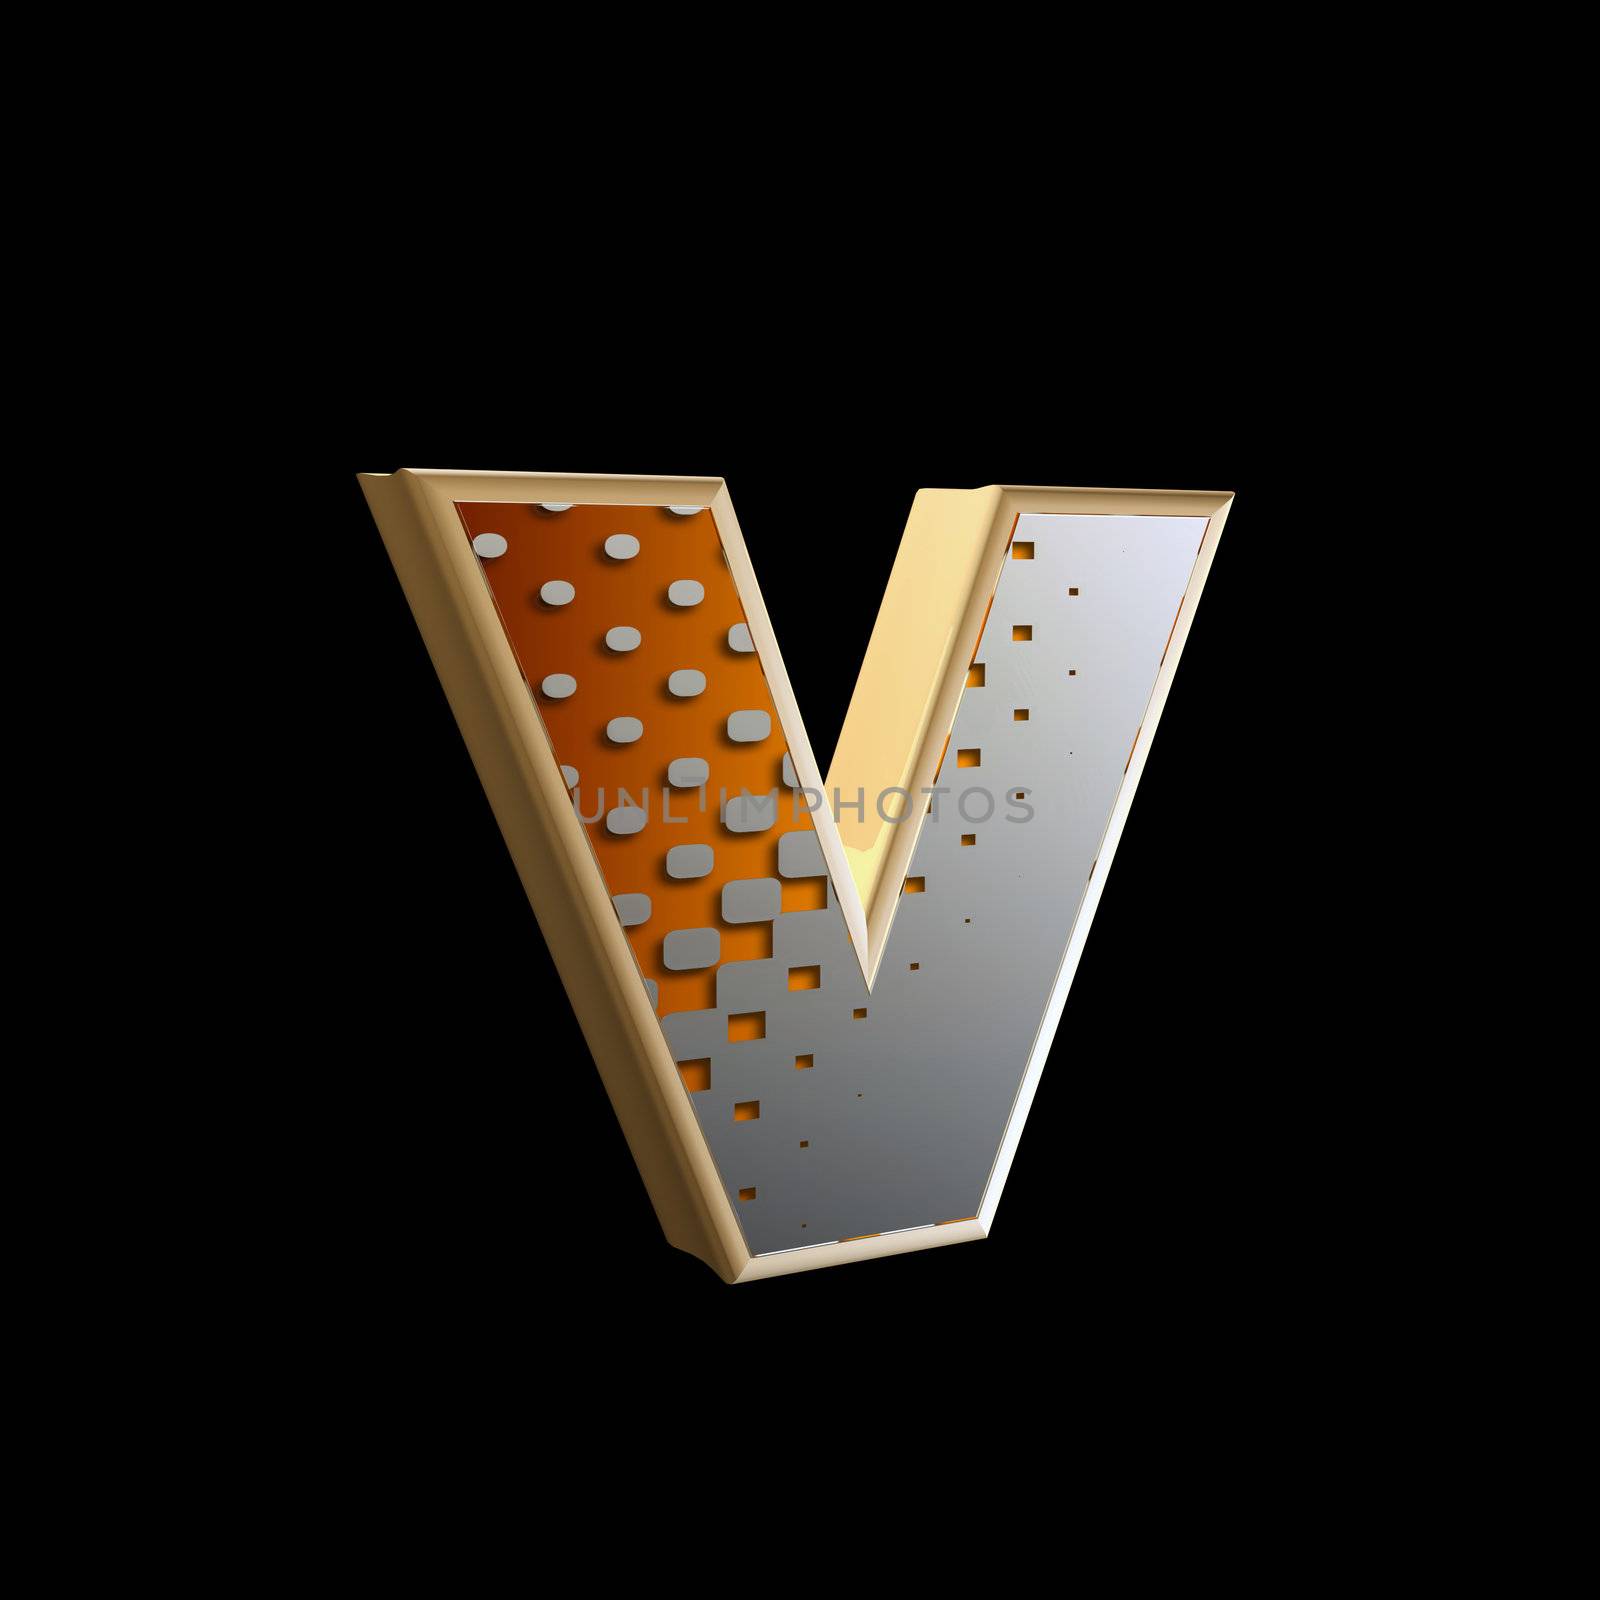 abstract 3d letter with halftone texture - v by chrisroll